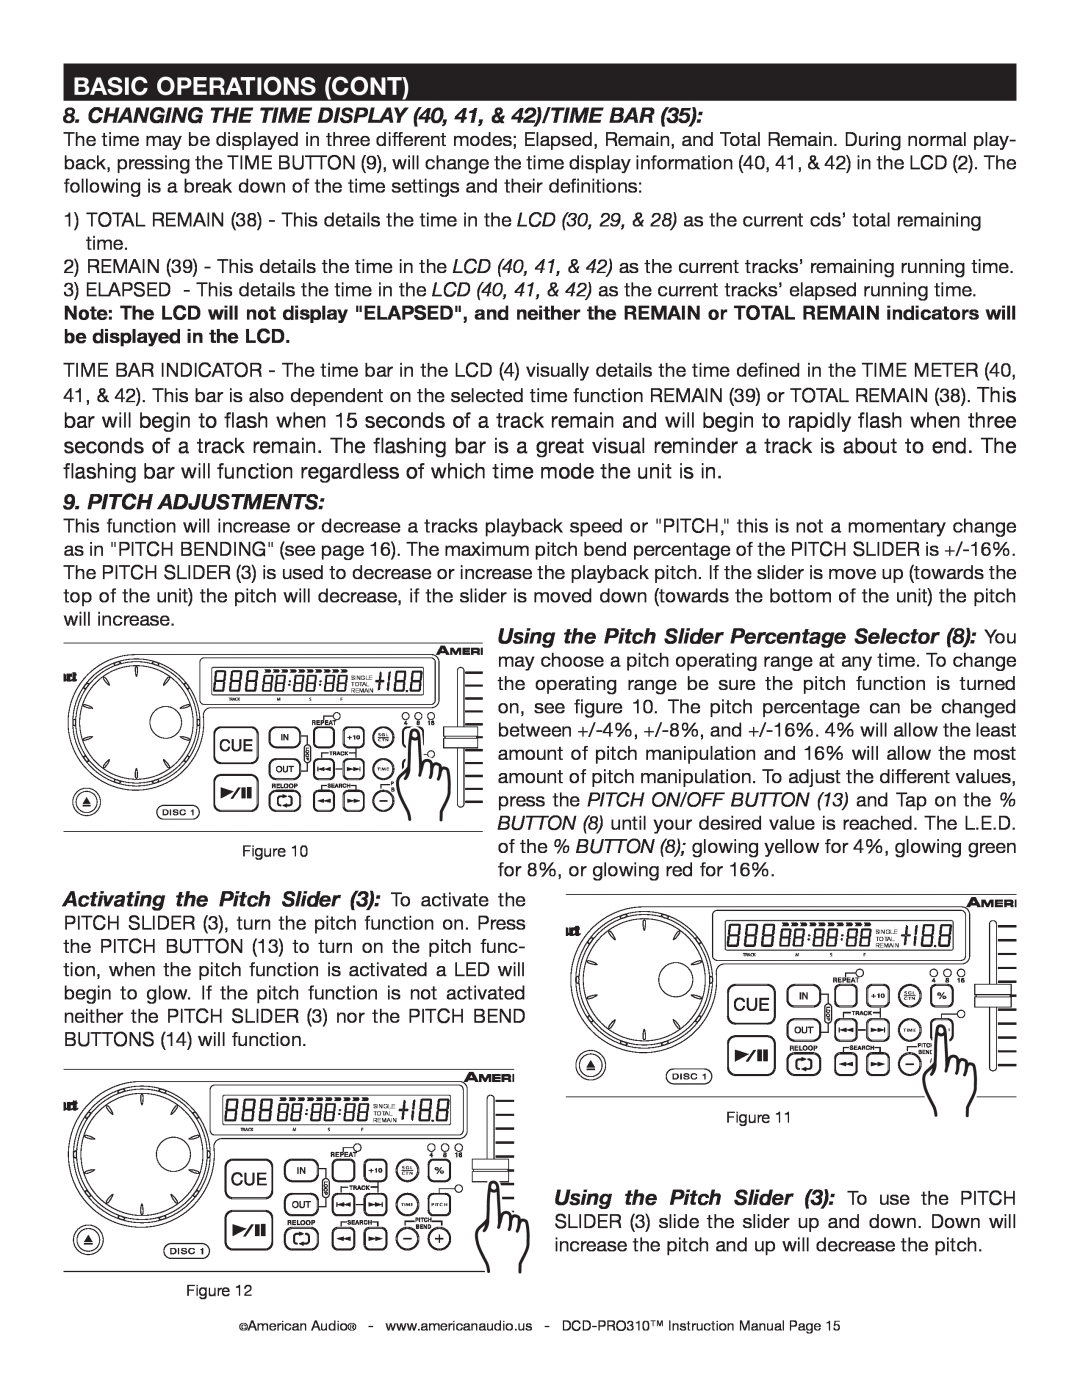 American Audio DCD-PRO310 operating instructions Basic Operations Cont, Pitch Adjustments 